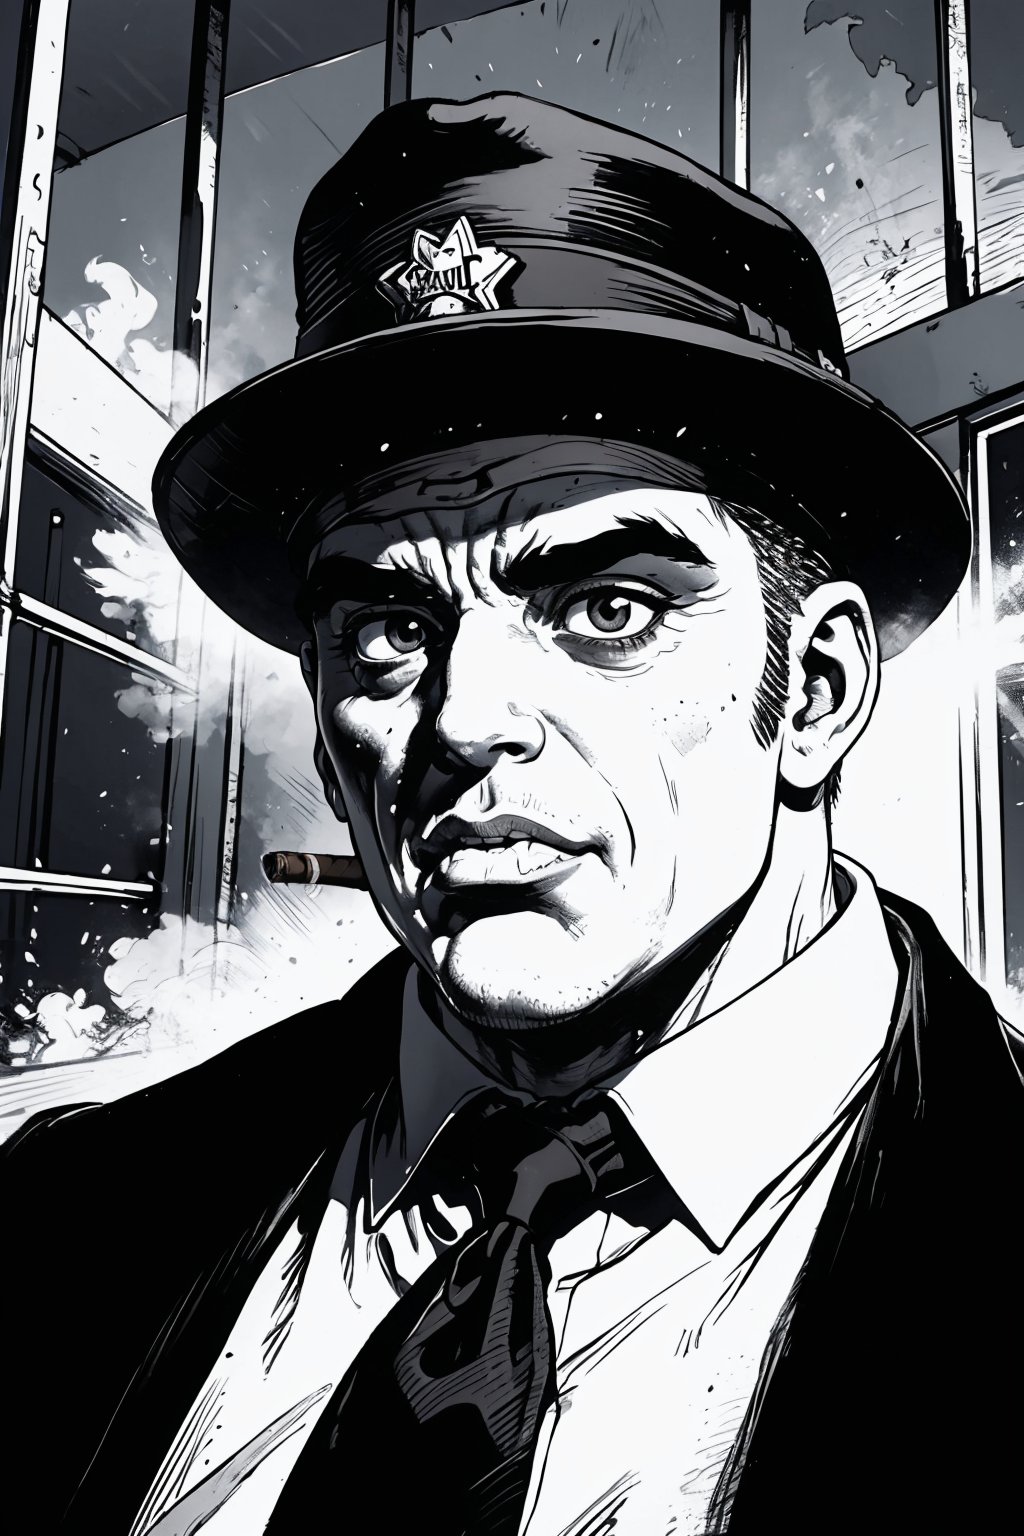 boichi manga style, monochrome, greyscale, solo, A criminal, he is Chicago mob boss Al Capone, round face, thick eyes, big mouth, thick lips, scarred cheeks, vicious face, smoking a cigar, wearing a round hat, tall and fat, wearing a prison uniform, in the cage, ((masterpiece))